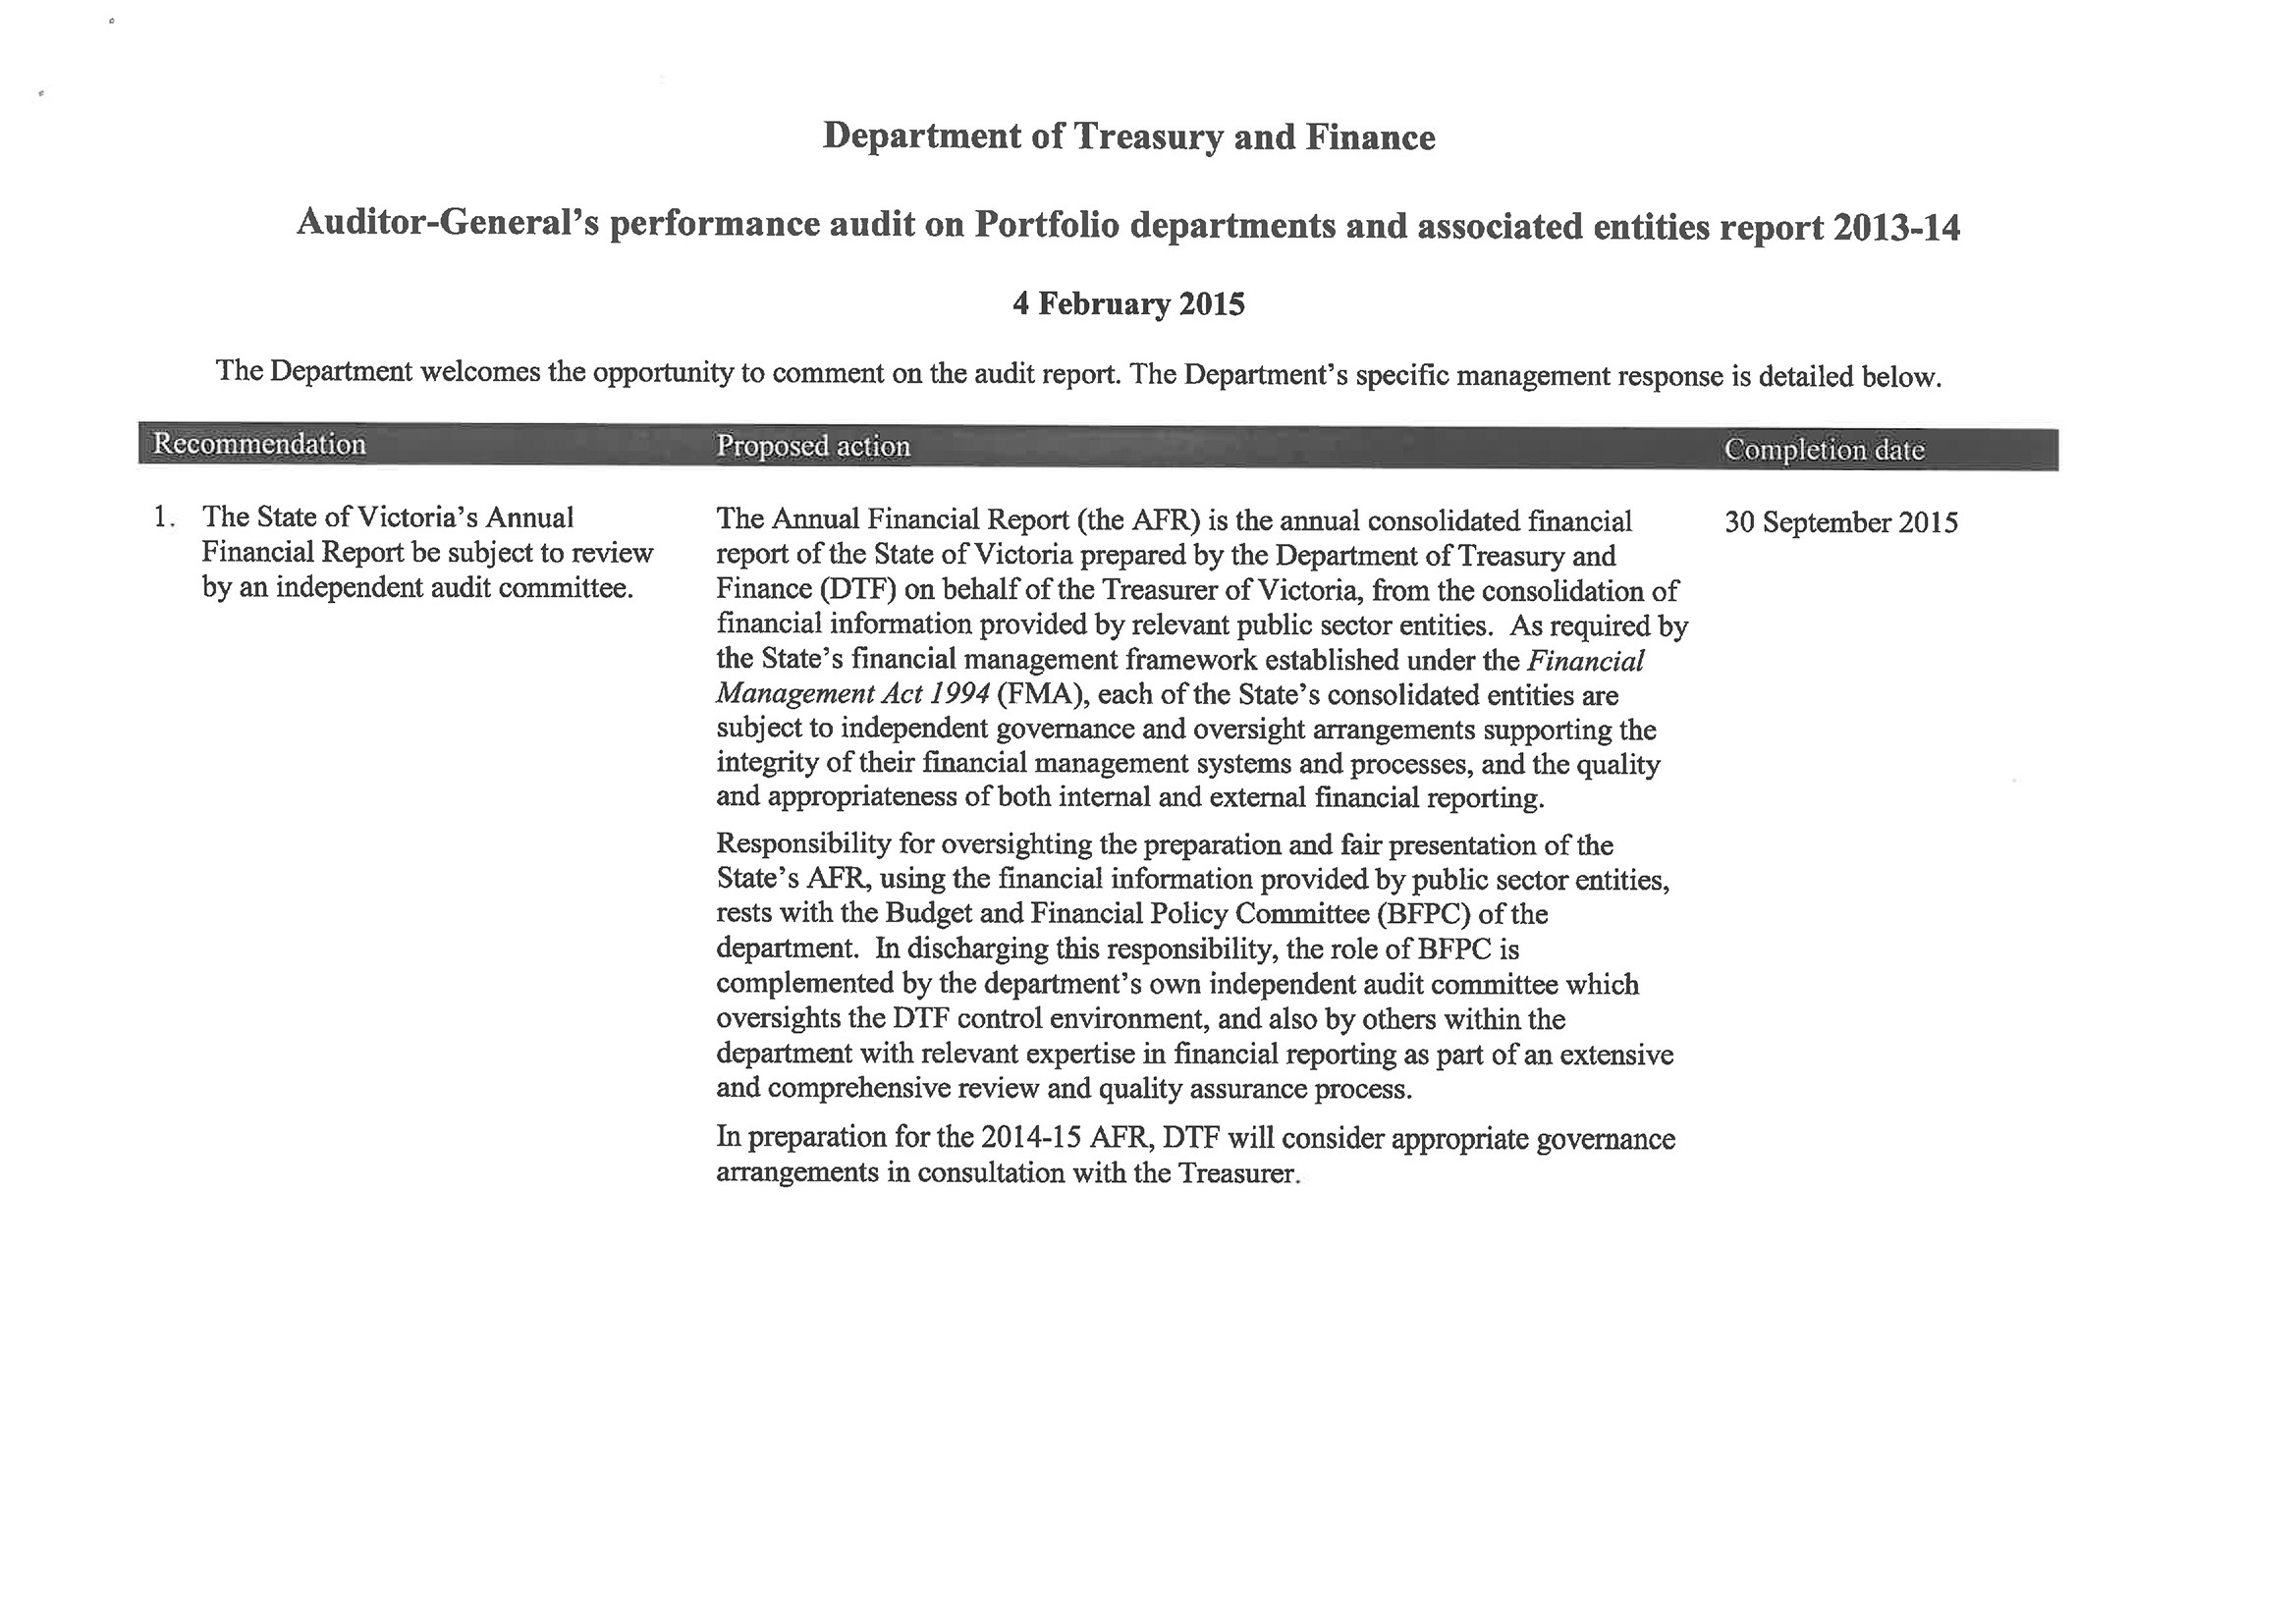  RESPONSE provided by the
Secretary, Department of Treasury and Finance